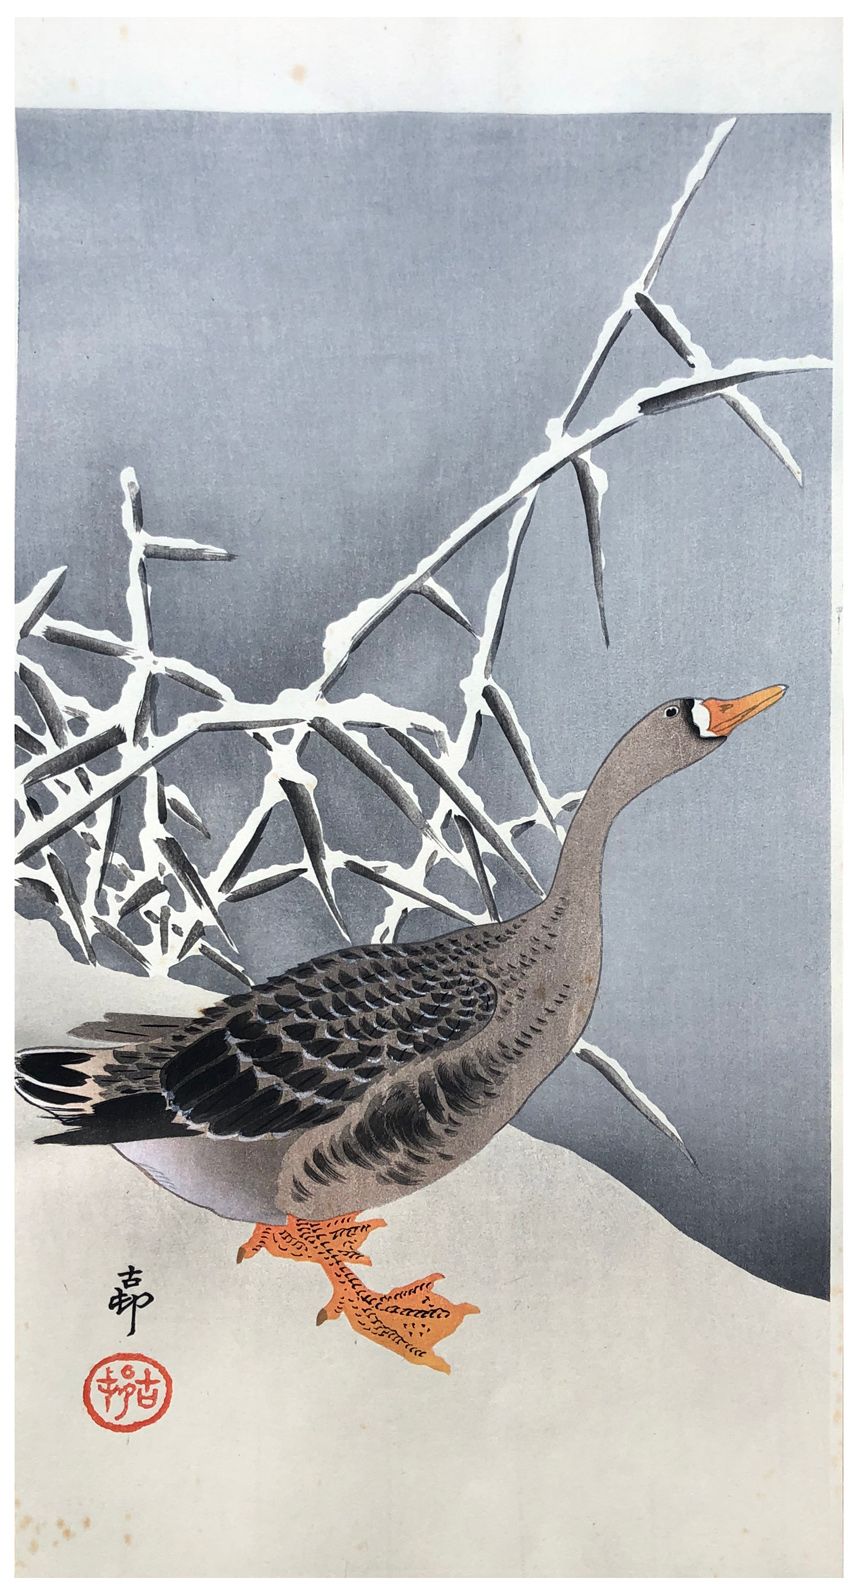 Japanese Woodblock Print by Ohara Koson Goose and Reeds in Snow 
Leicht stockfle&hellip;